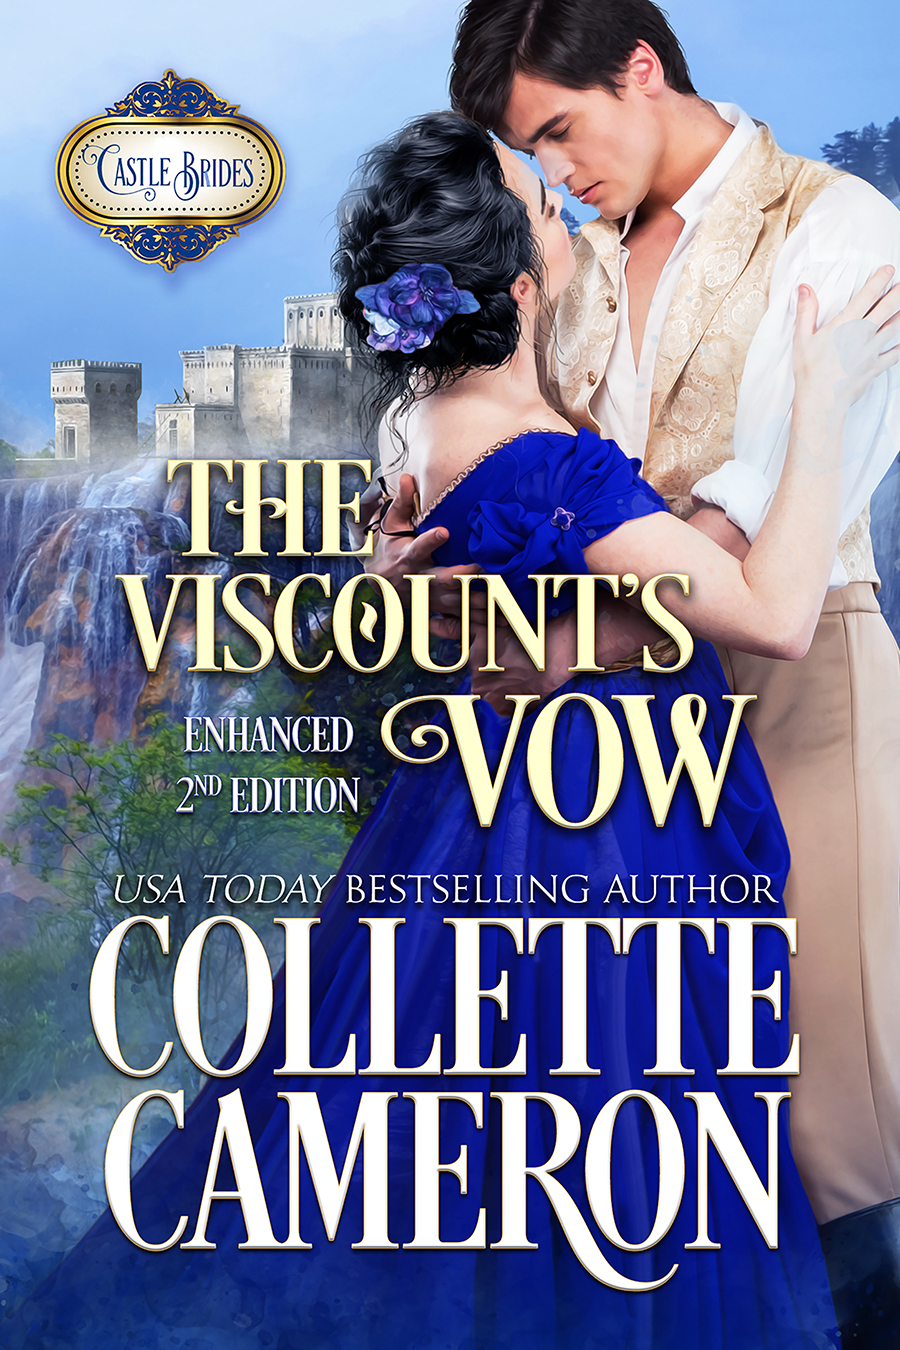 The Viscount's Vow, USA Today Bestselling Author Collette Cameron, Collette Cameron historical romances, Collette Cameron Regency romances, Collette Cameron romance novels, Collette Cameron Scottish historical romance books, Blue Rose Romance, Bestselling historical romance authors, historical romance novels, Regency romance novels, Highlander romance books, Scottish romance novels, romance novel covers, Bestselling romance novels, Bestselling Regency romances, Bestselling Scottish Romances, Bestselling Highlander romances, Victorian Romances, lords and ladies romance novels, Regency England Dukes romance books, aristocrats and royalty, happily ever after novels, love stories, wallflowers, rakes and rogues, award-winning books, Award-winning author, historical romance audio books, collettecameron.com, The Regency Rose Newsletter, Sweet-to-Spicy Timeless Romance, historical romance meme, romance meme, historical regency romance 